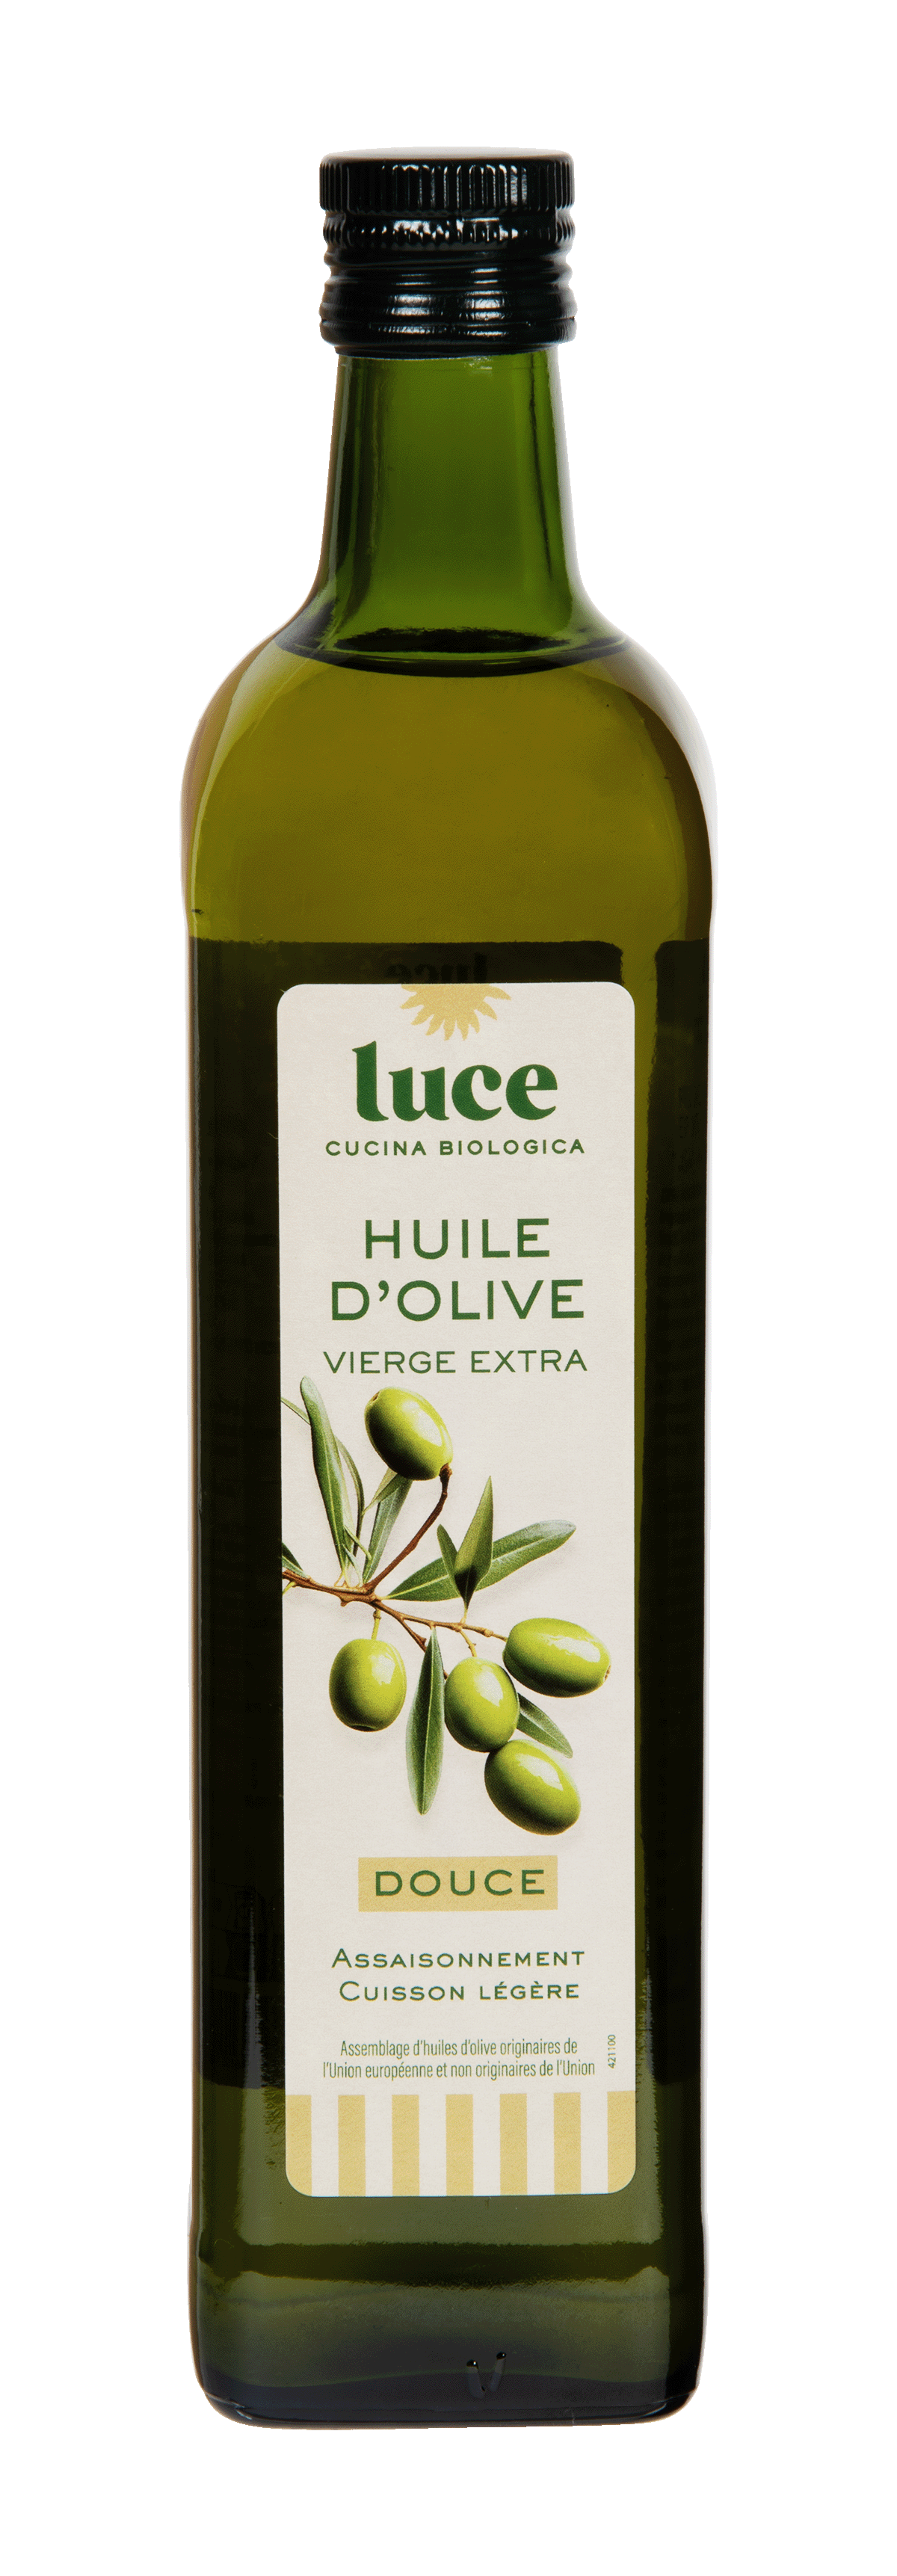 Luce Huile d'olive vierge extra douce bio 75cl - 1591